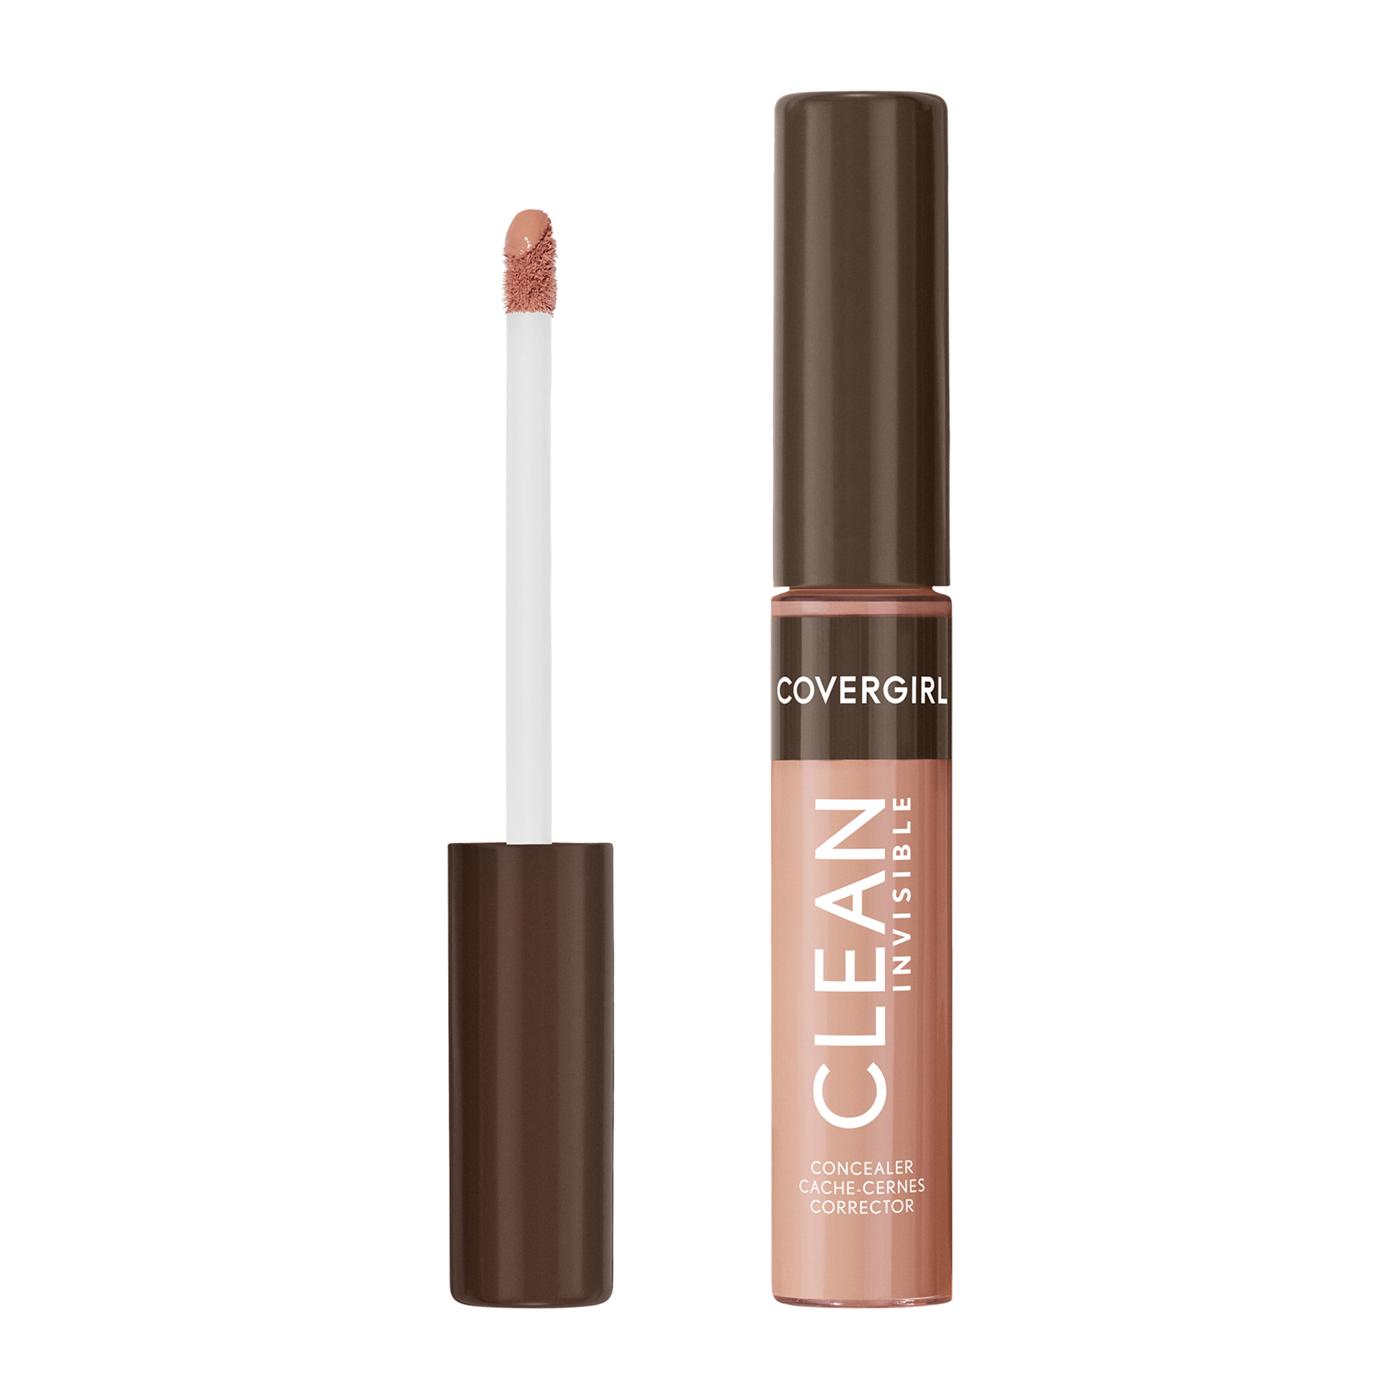 Covergirl Clean Invisible Concealer - Natural Beige; image 7 of 15